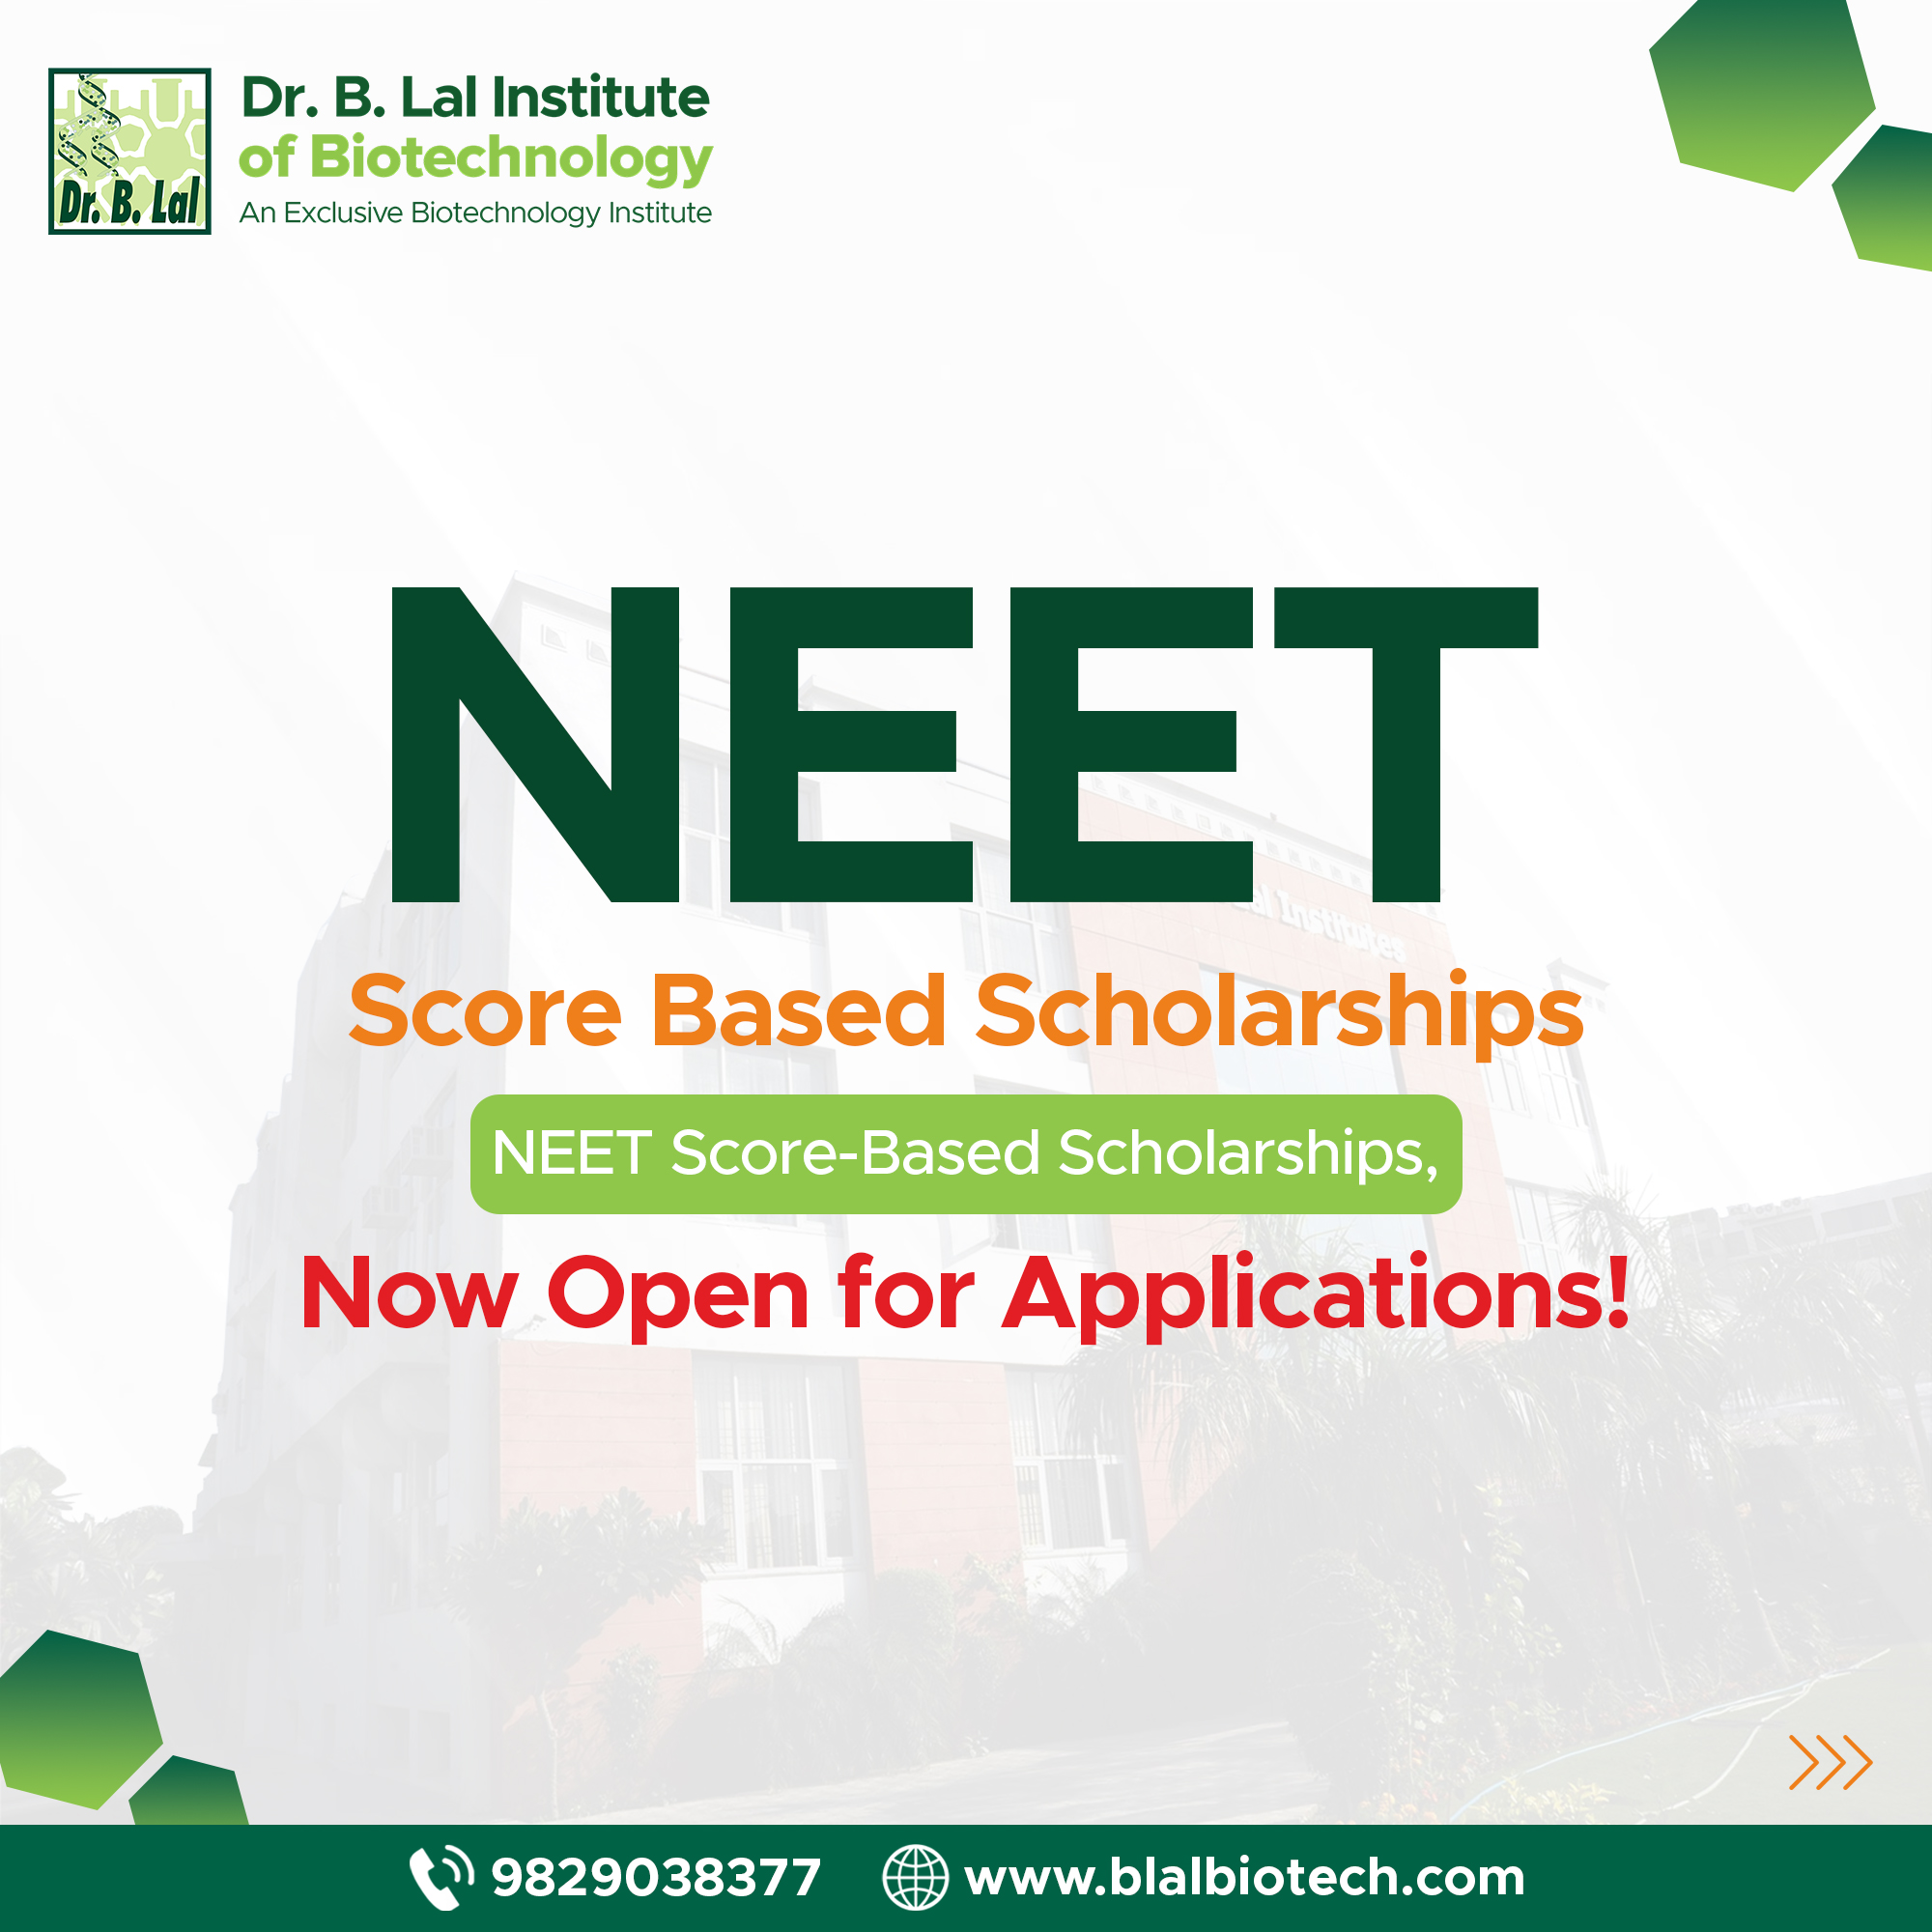 Ignite Your Medical Journey with the NEET Excellence Scholarship at Dr. B. Lal Institute of Biotechnology